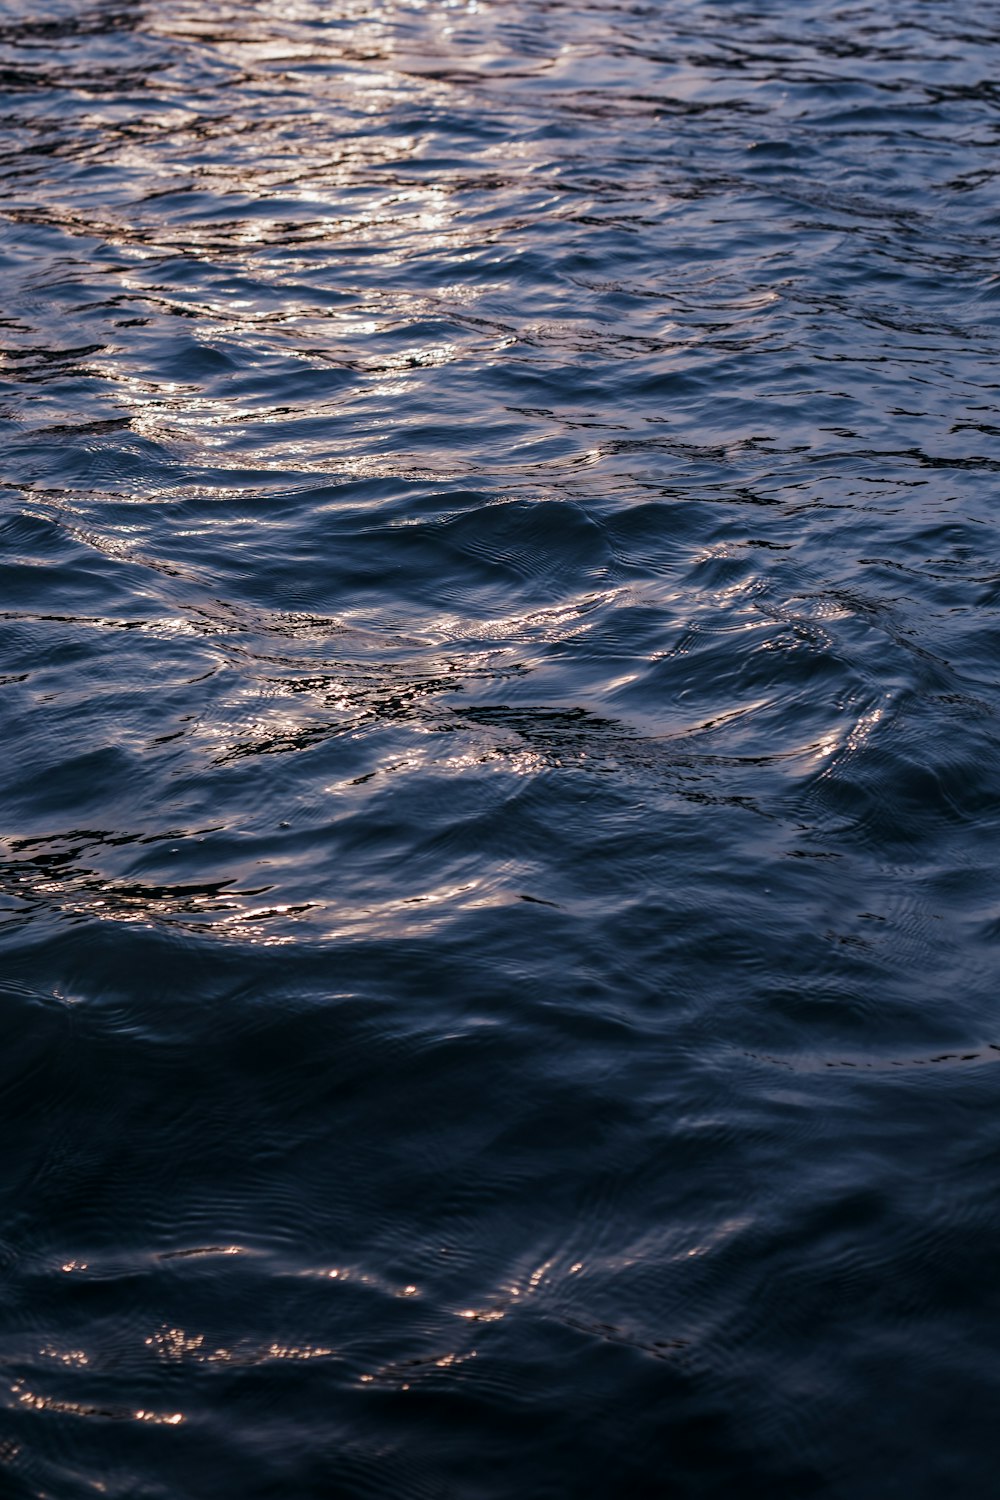 the sun shines on the water as it reflects off the surface of the water